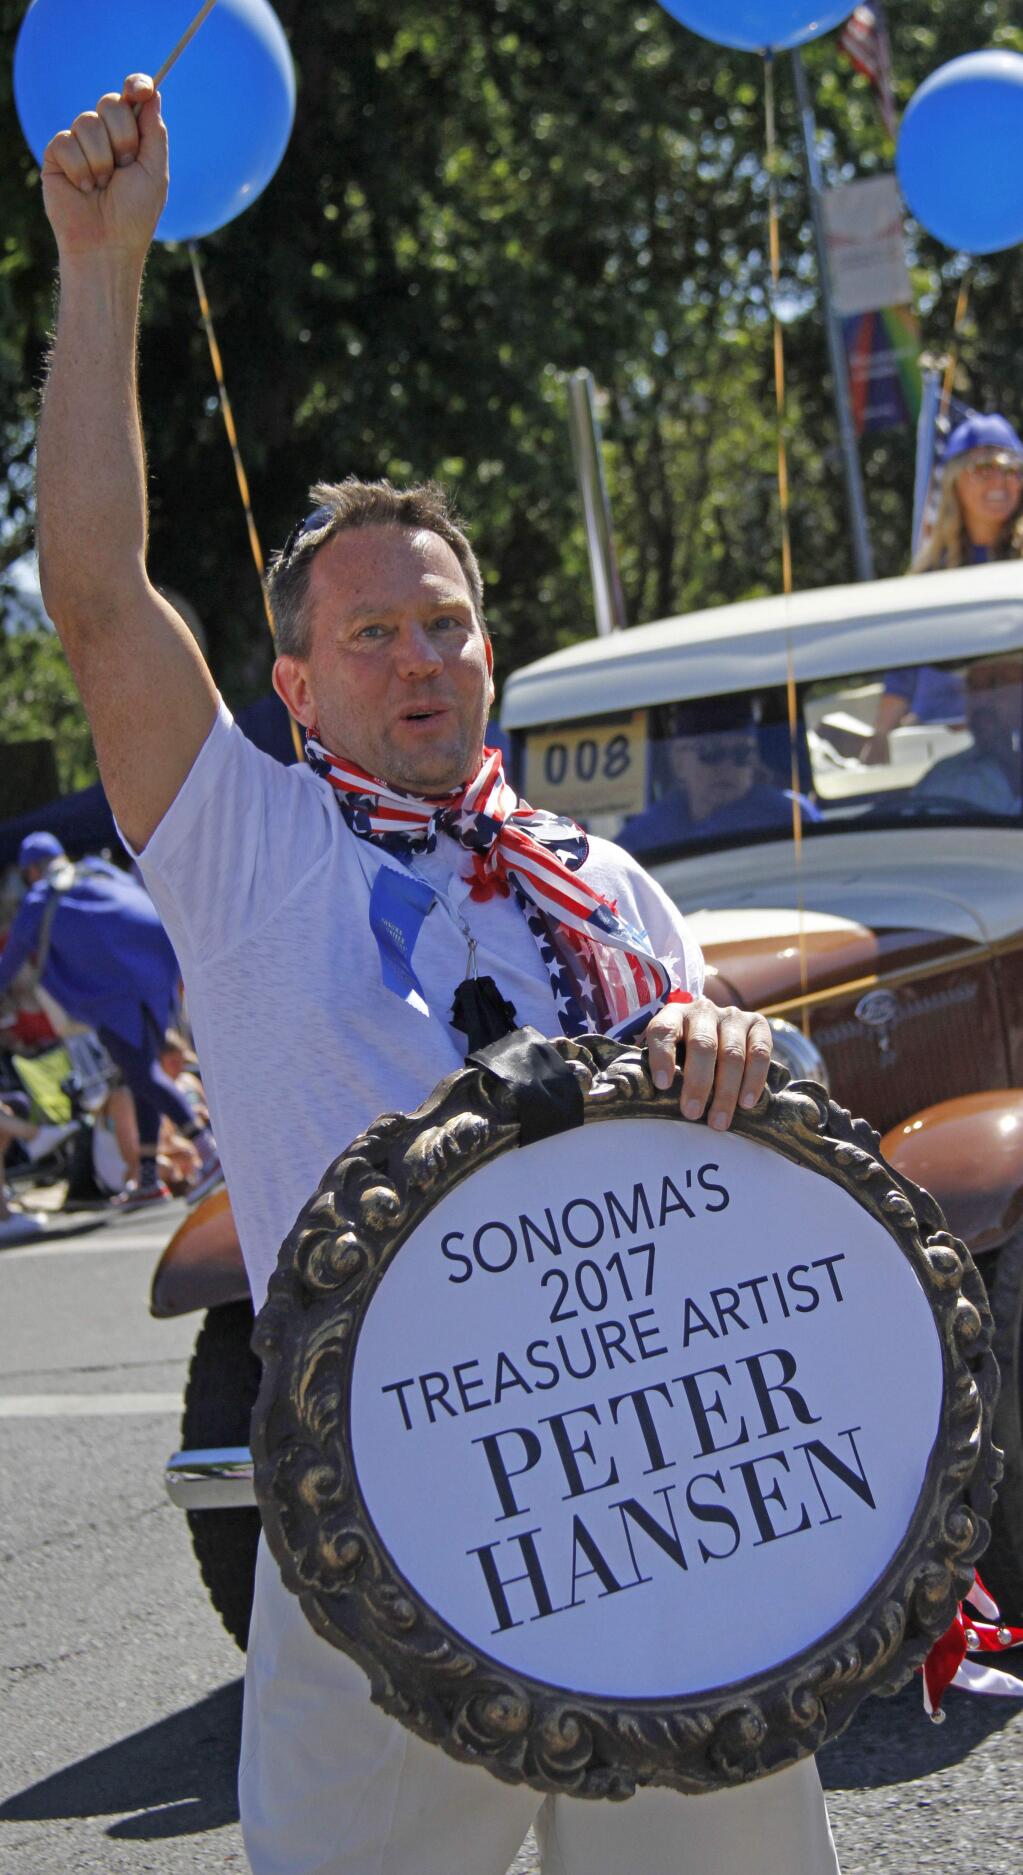 Sonoma's 2017 Treasure Artist Peter Hansen was having a great time during Sonoma's annual July 4 parade Tuesday. Photos by Bill Hoban/Index-Tribune